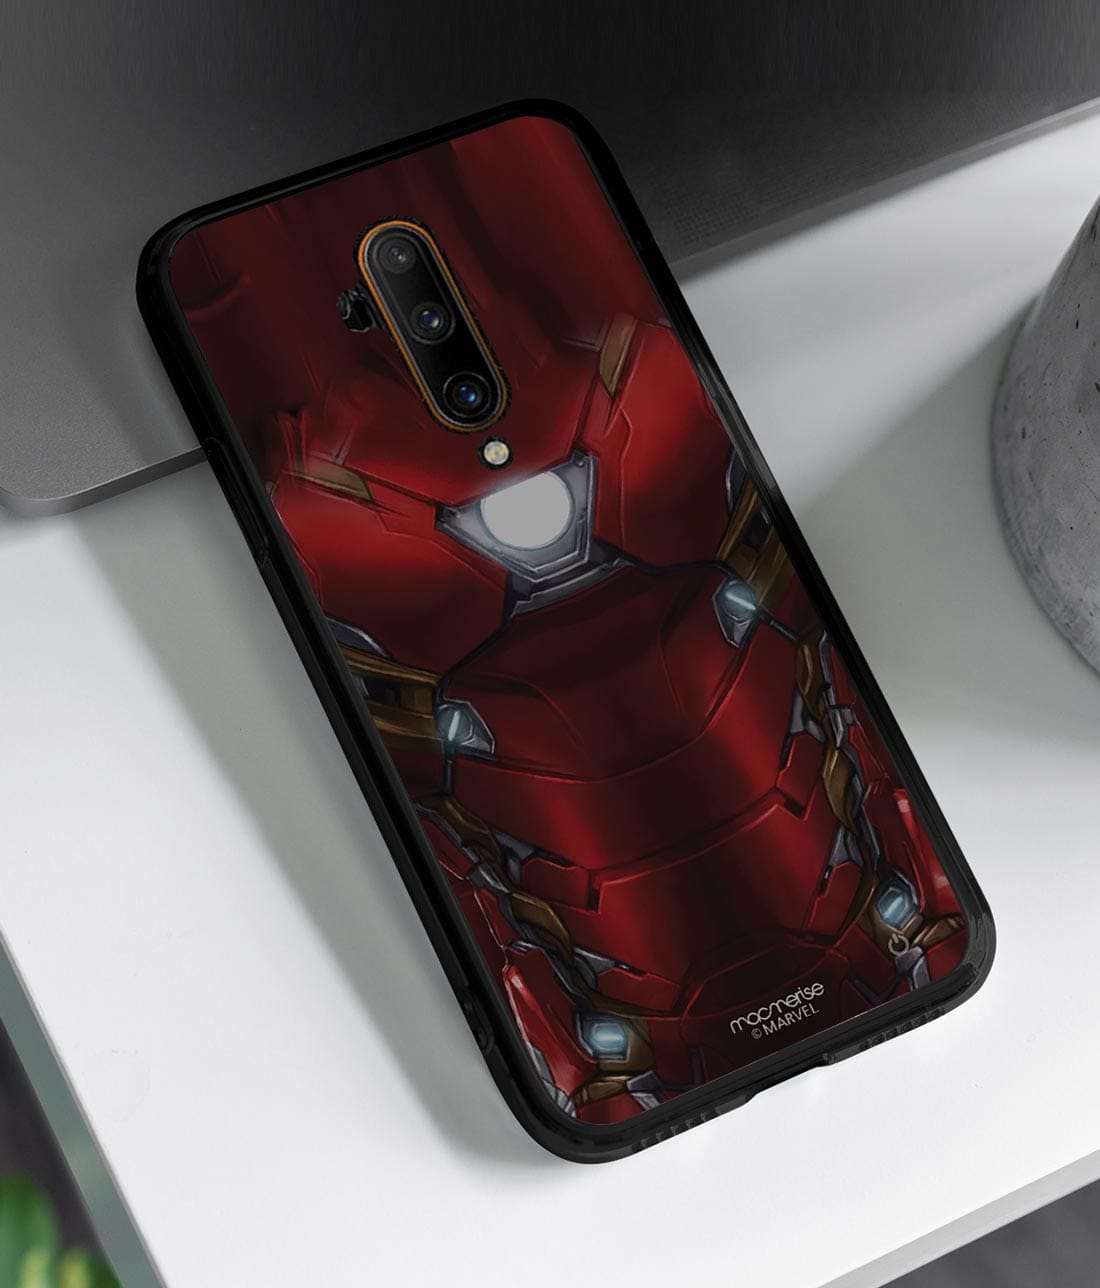 Suit up Ironman - Lumous LED Phone Case for OnePlus 7T Pro